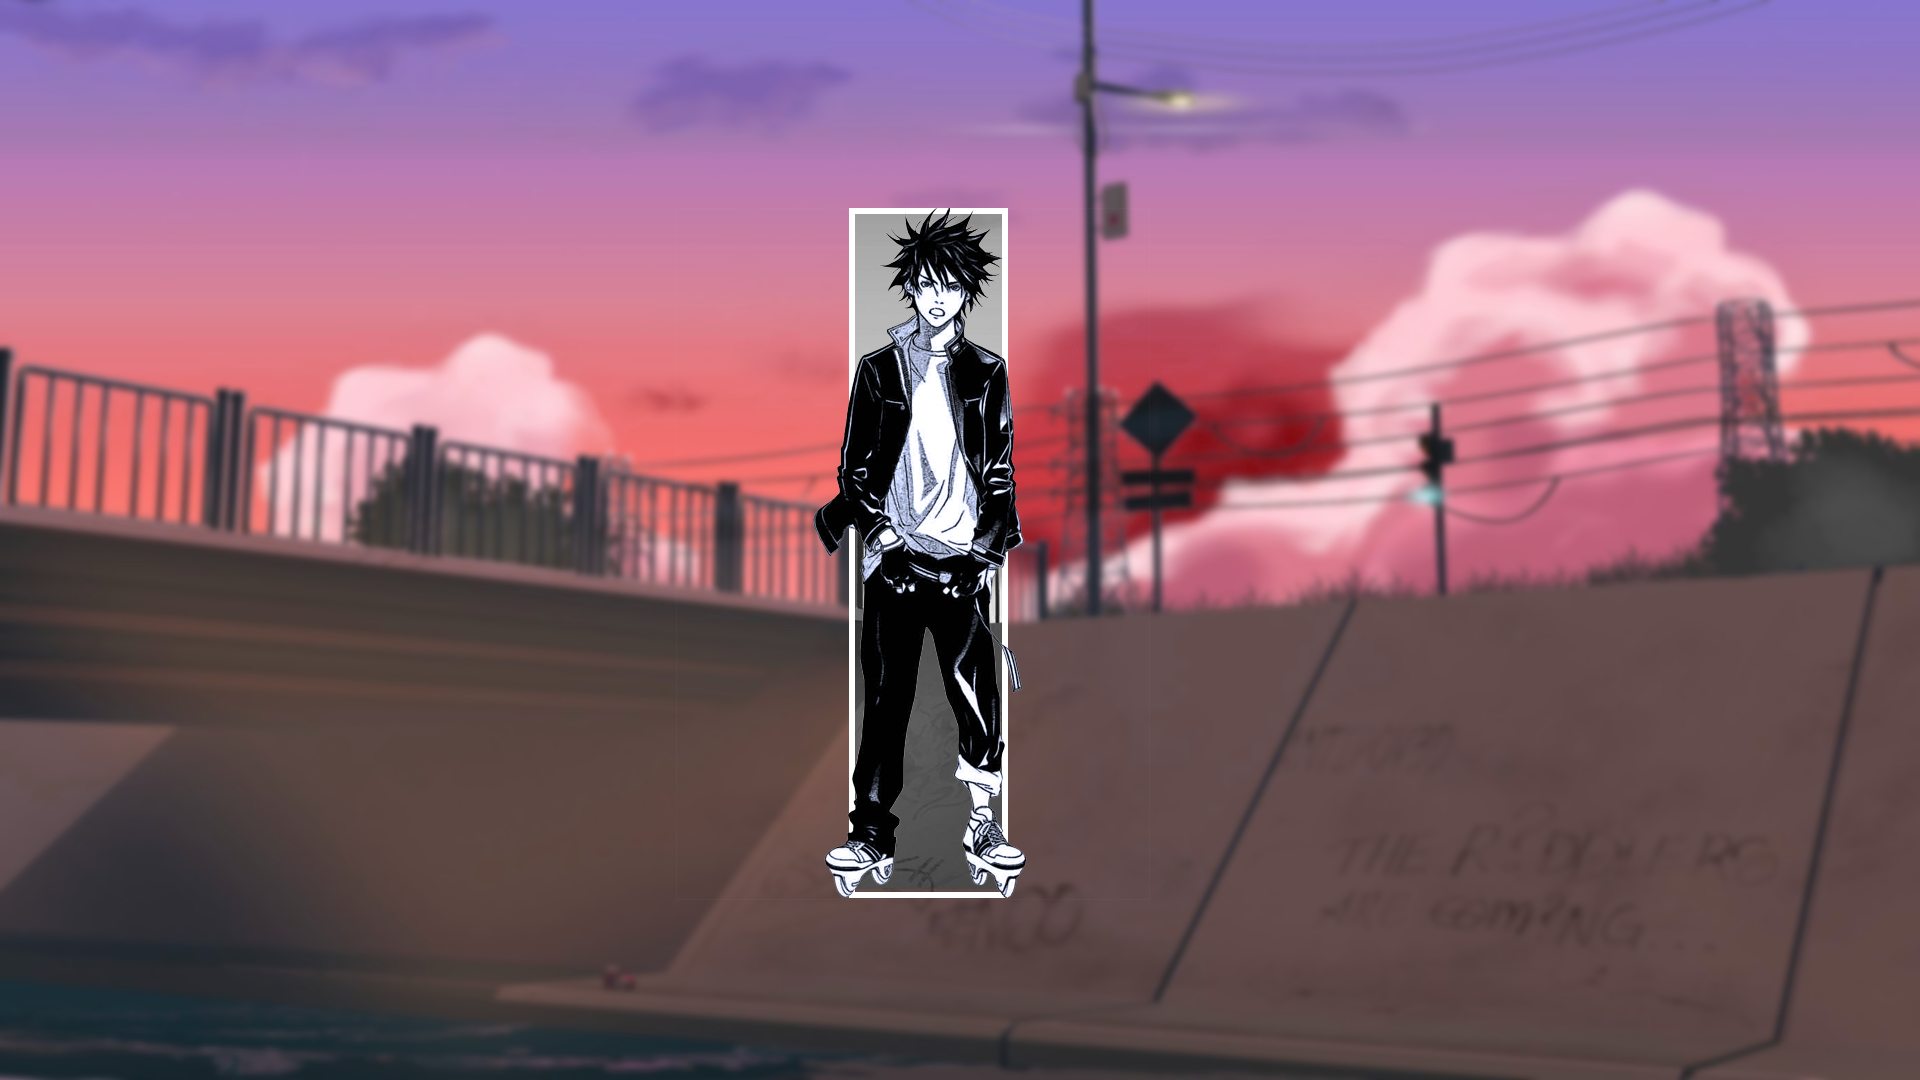 Air Gear Picture In Picture Piture In Picture Minami Itsuki 1920x1080